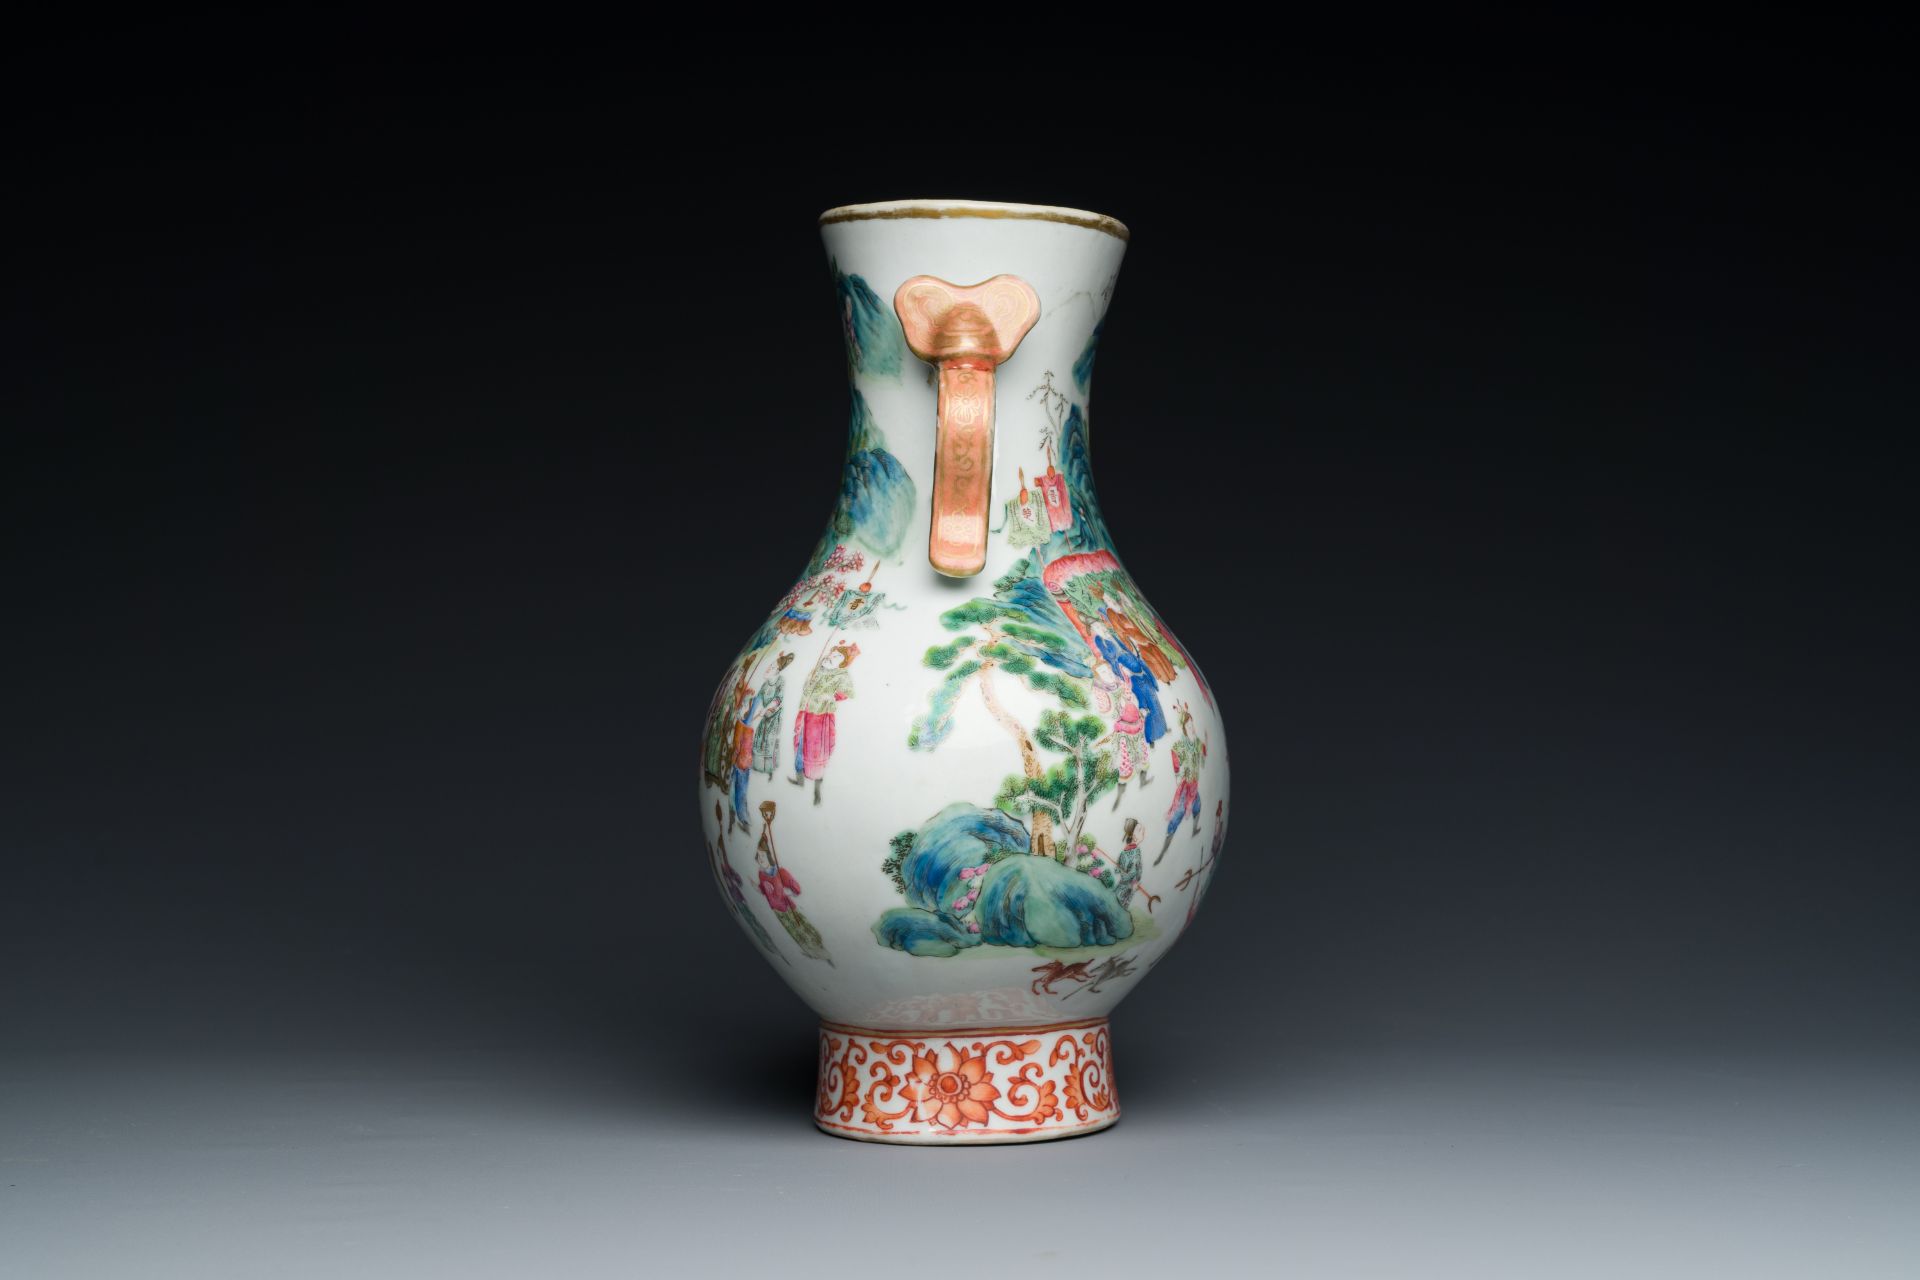 A fine Chinese famille rose 'hu' vase with ruyi handles, 19th C. - Image 2 of 6